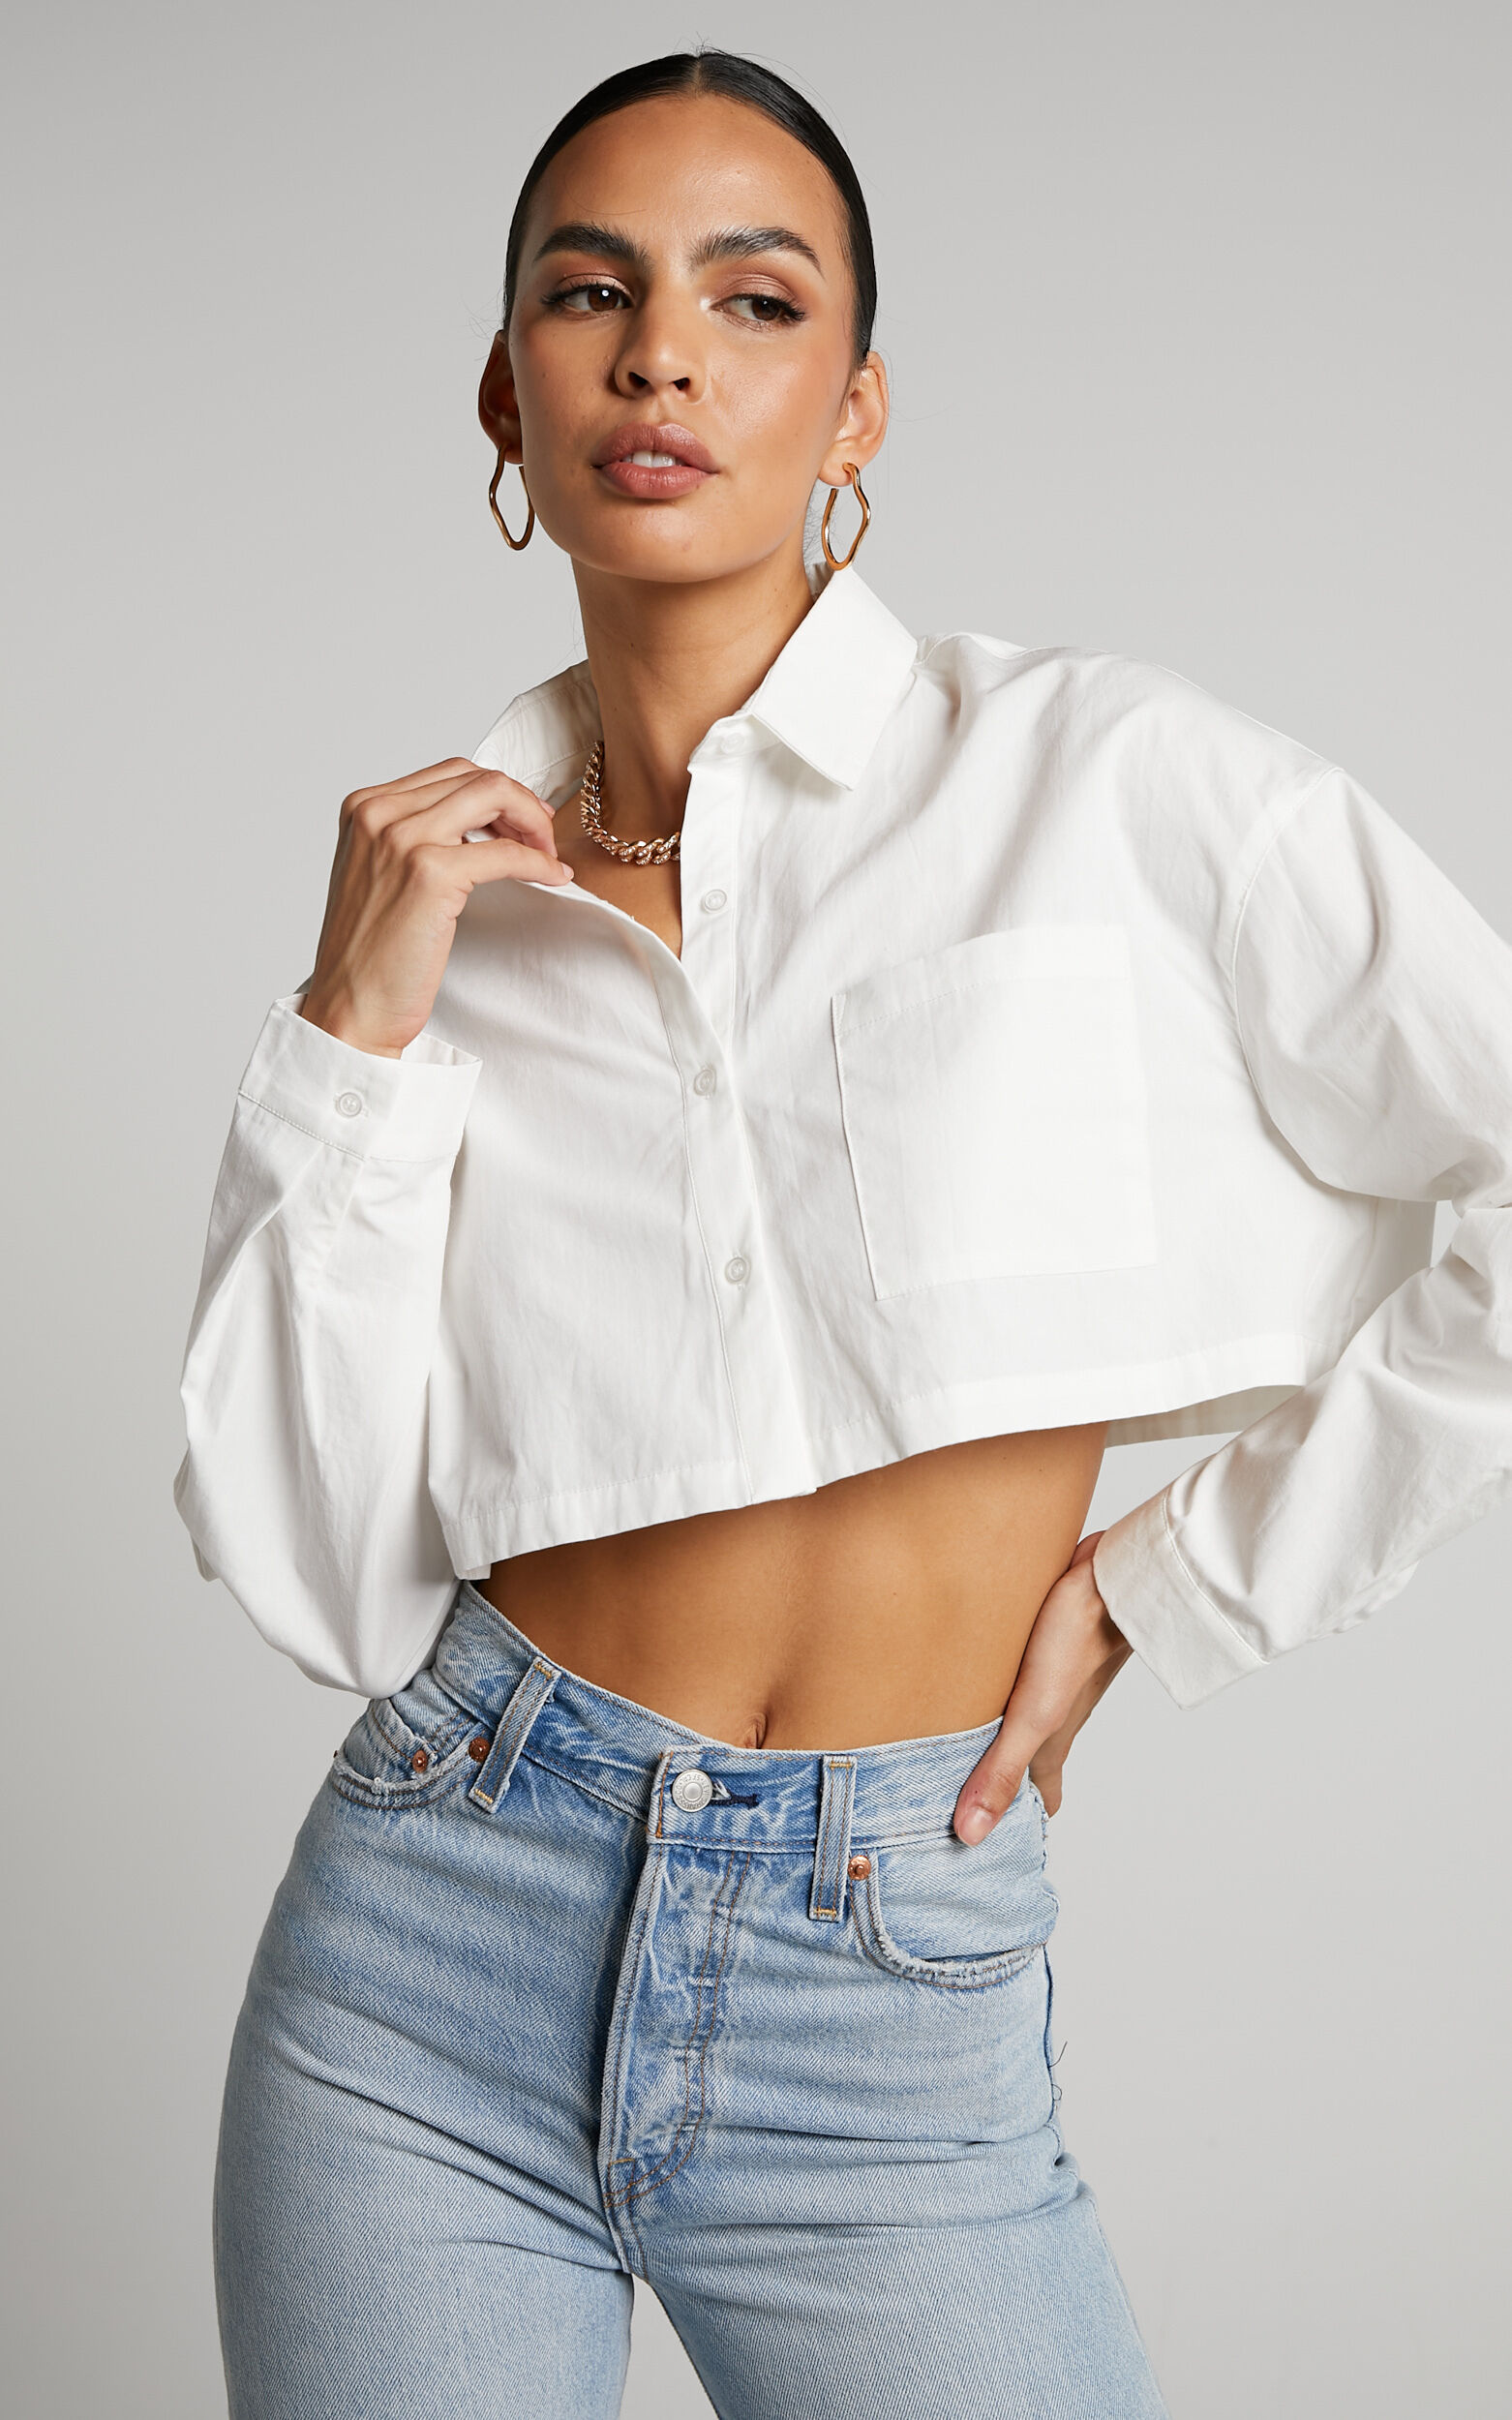 Elenina Top - Button Up Cropped Shirt in White - 06, WHT1, super-hi-res image number null